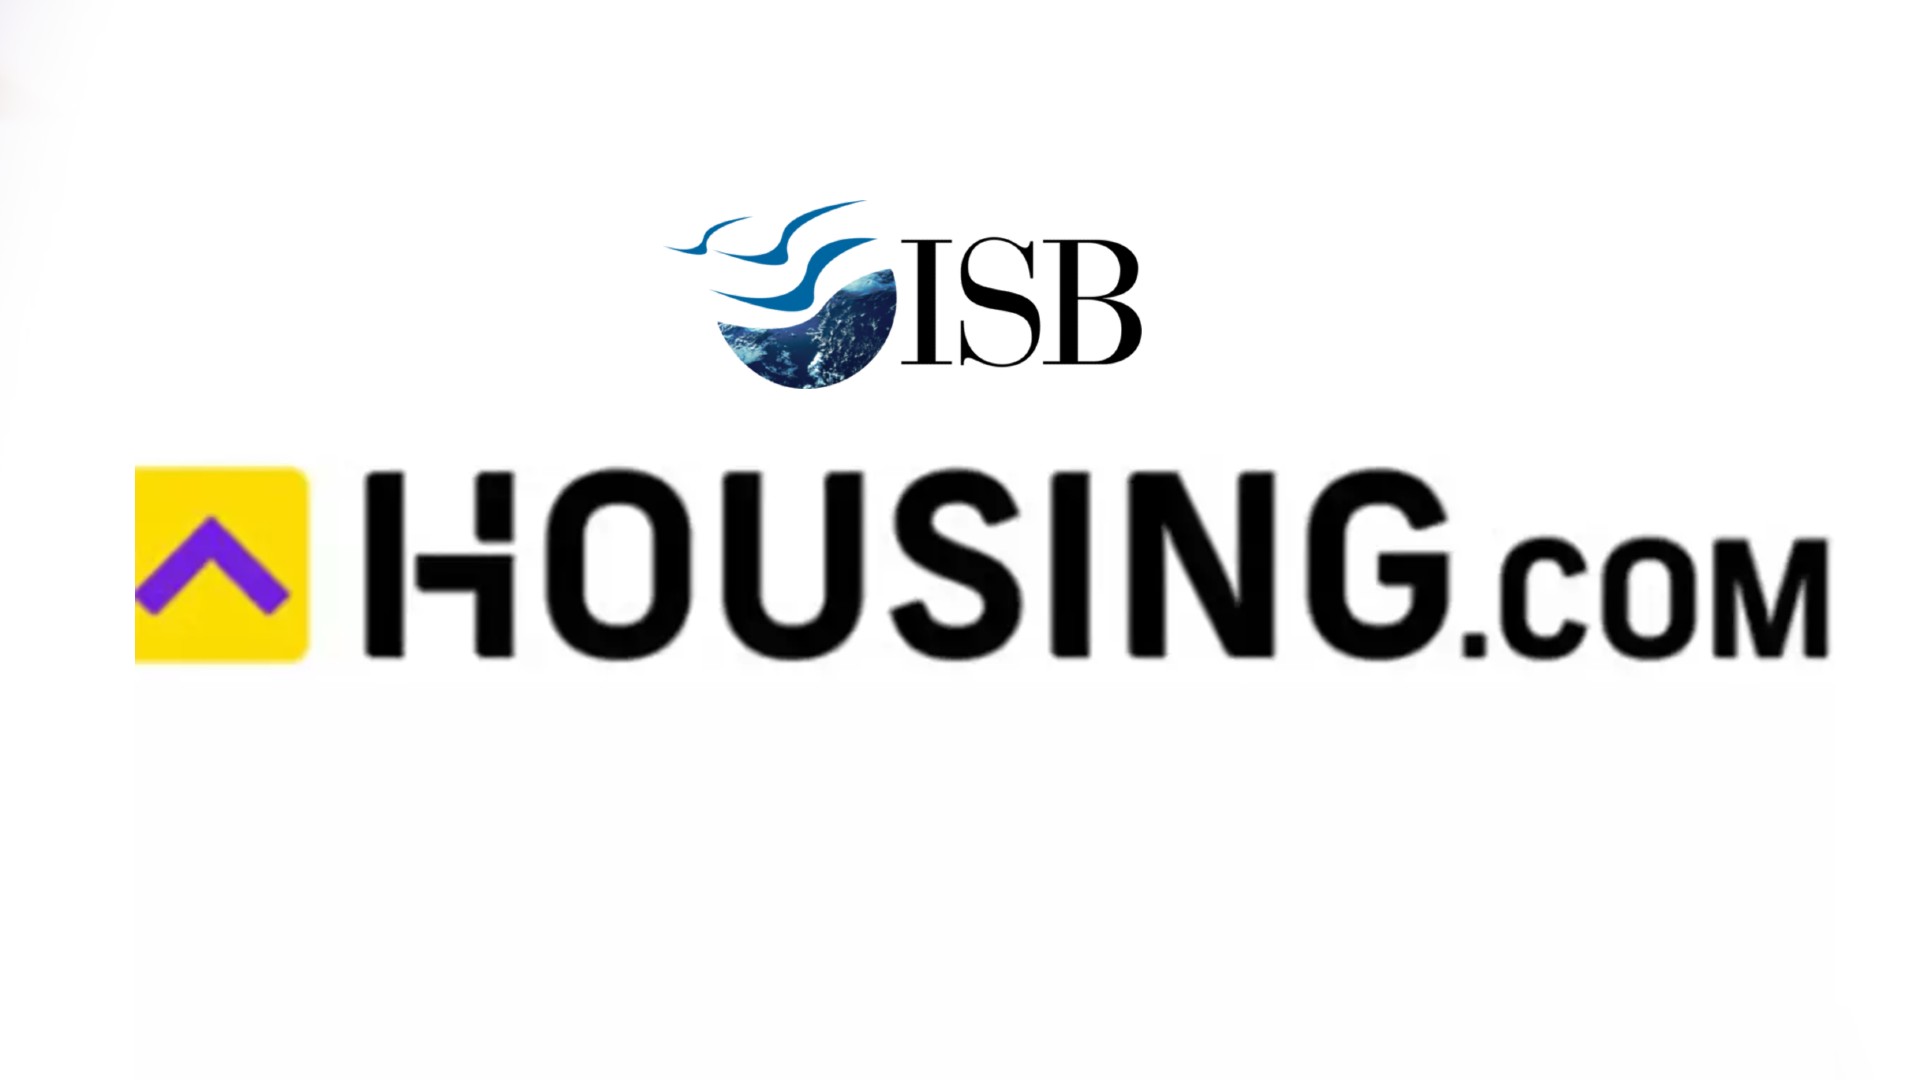 Housing Pricing Index launched to help homebuyers make informed investment decisions.